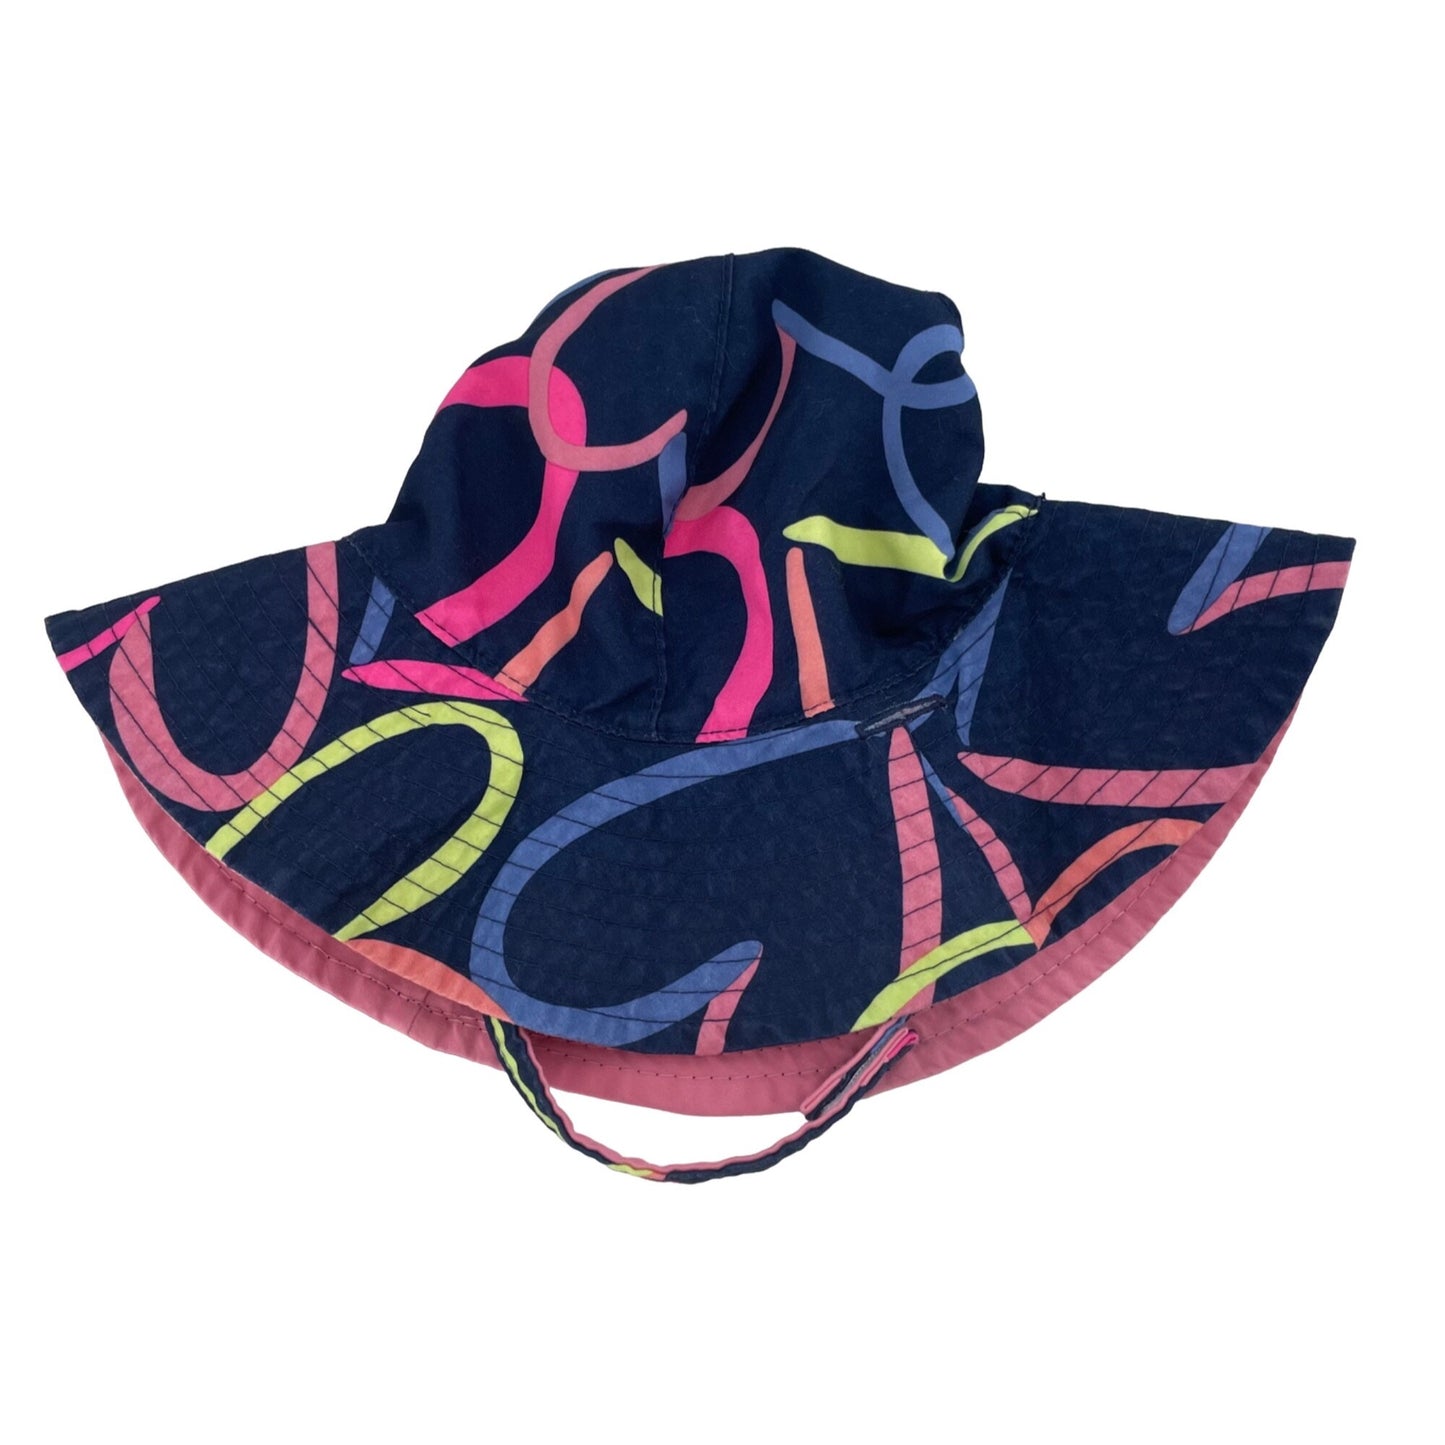 Carter's Baby Girl's Size 12-24 Months Reversible Pink/Navy Hat W/ Multi-Colored Heart-Shaped Pattern